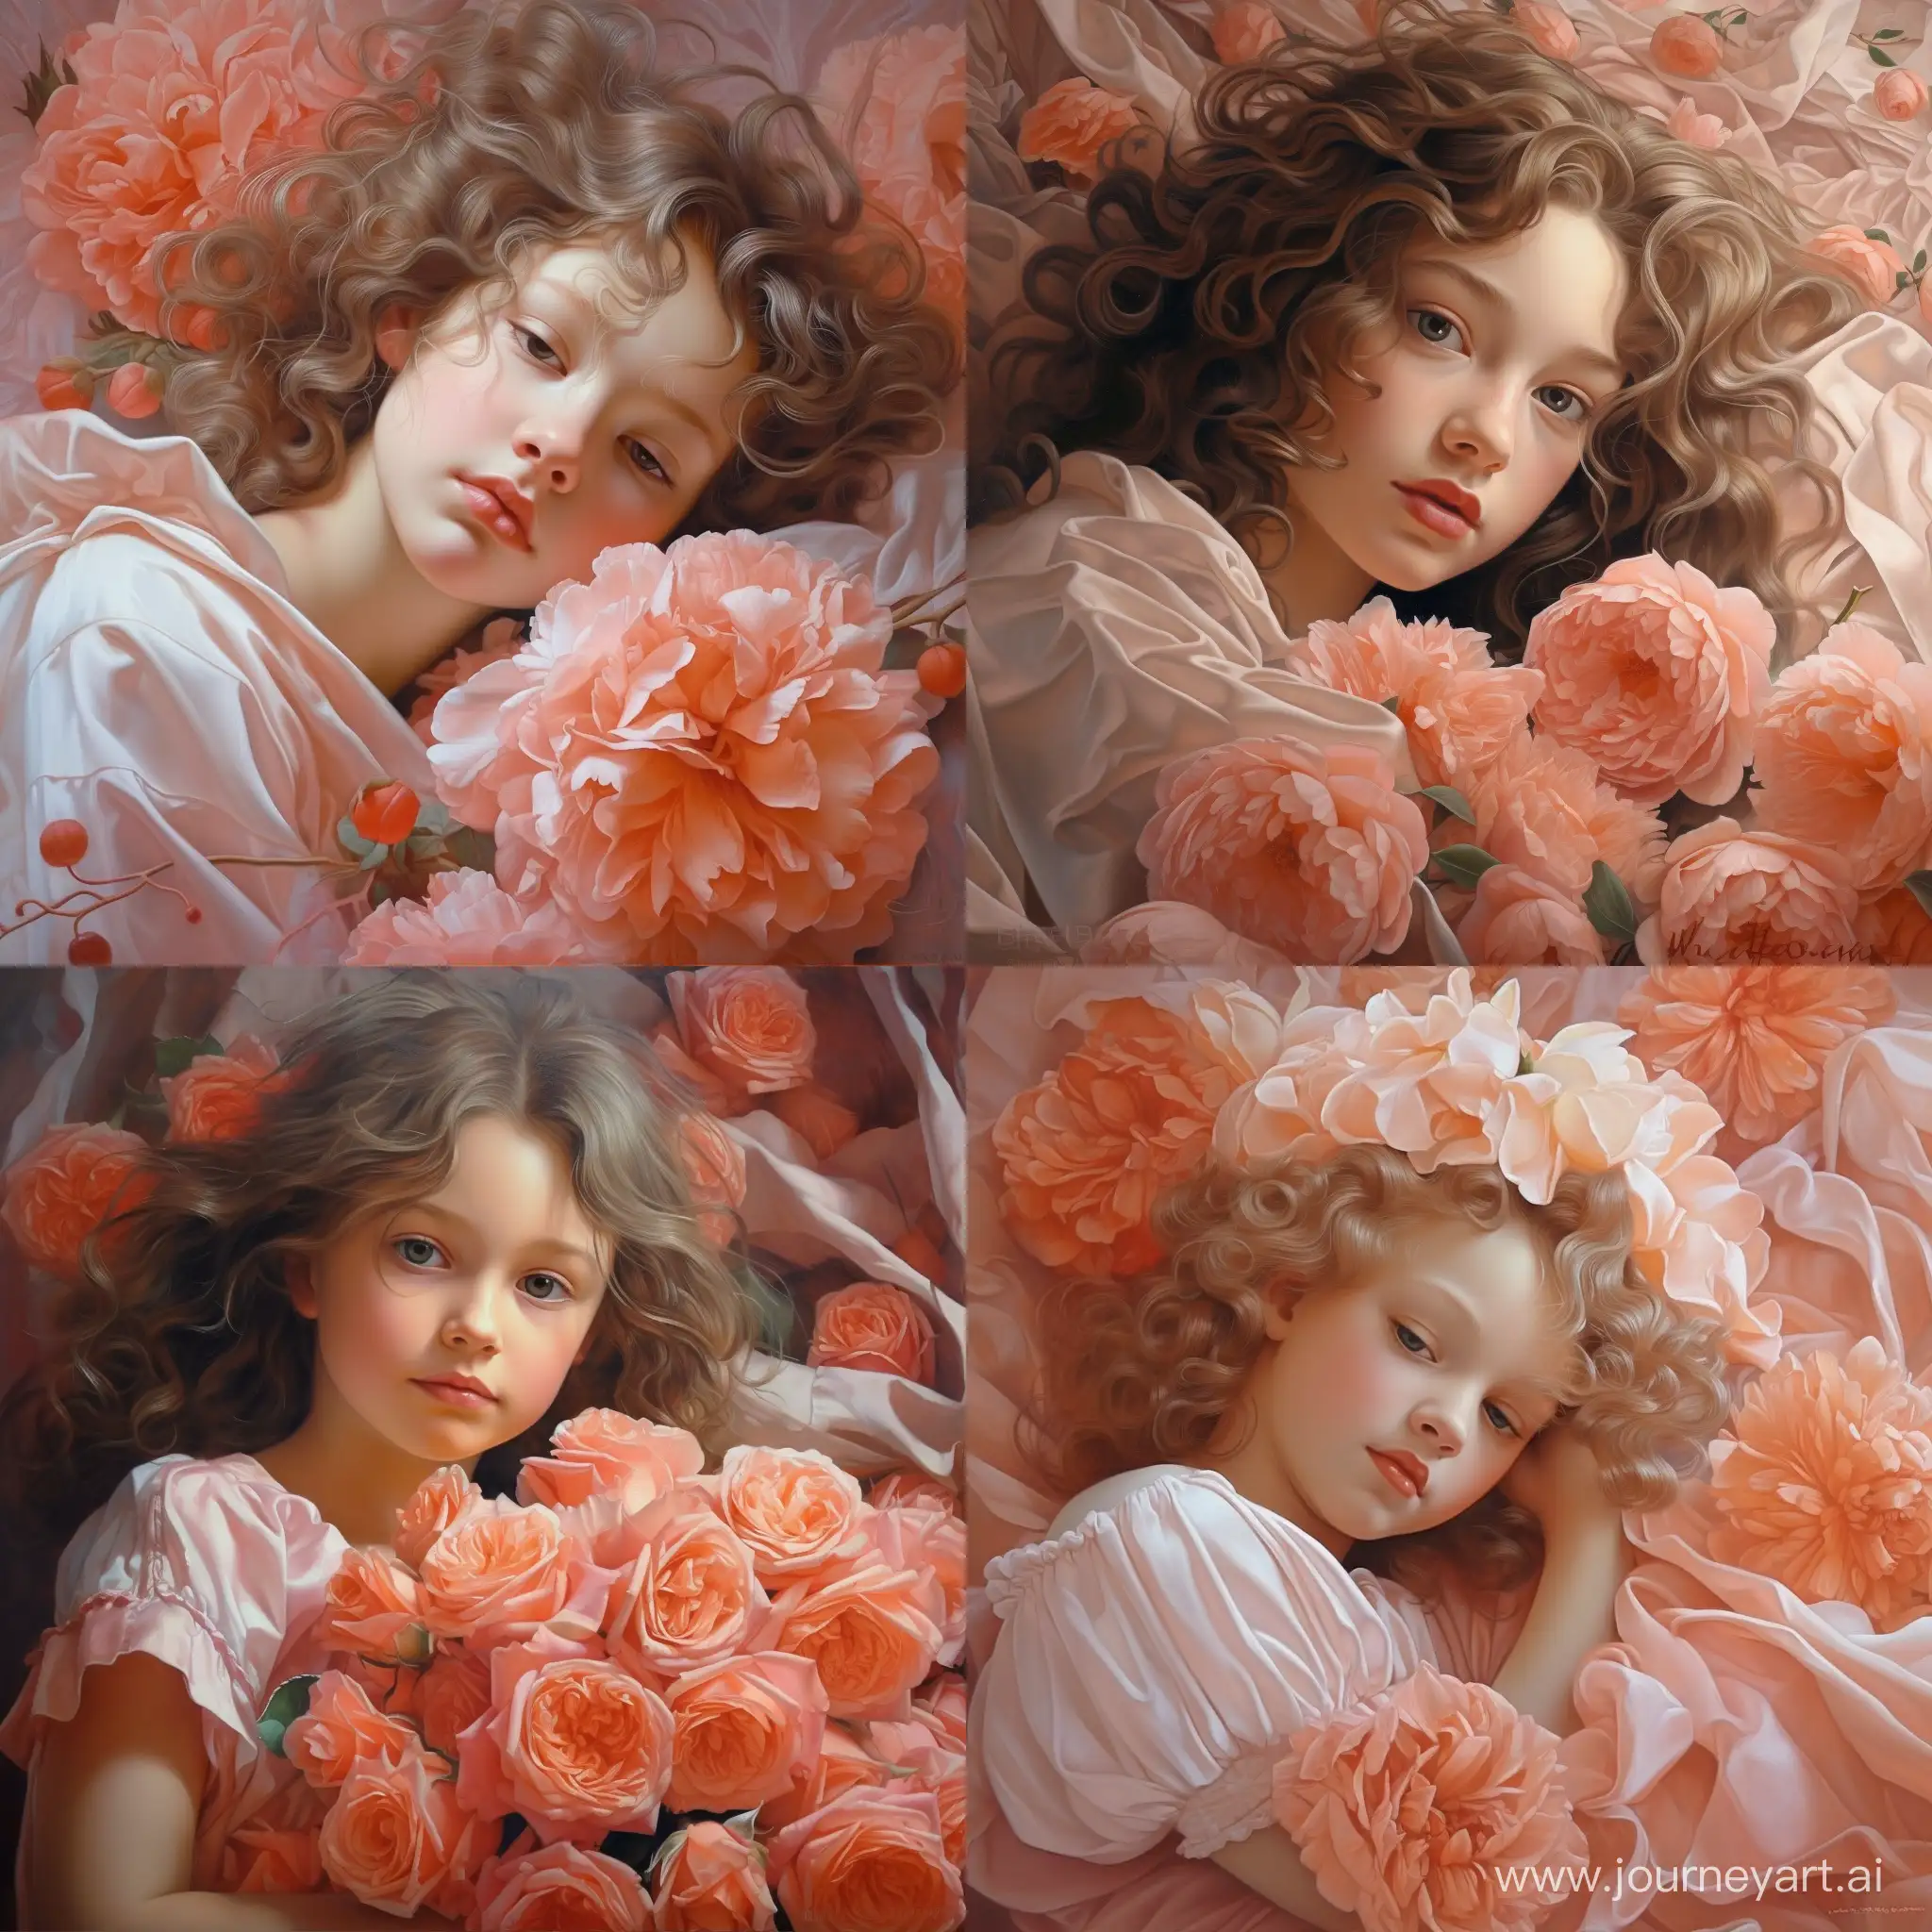 Tender-Moments-Captured-in-PeachToned-Photorealism